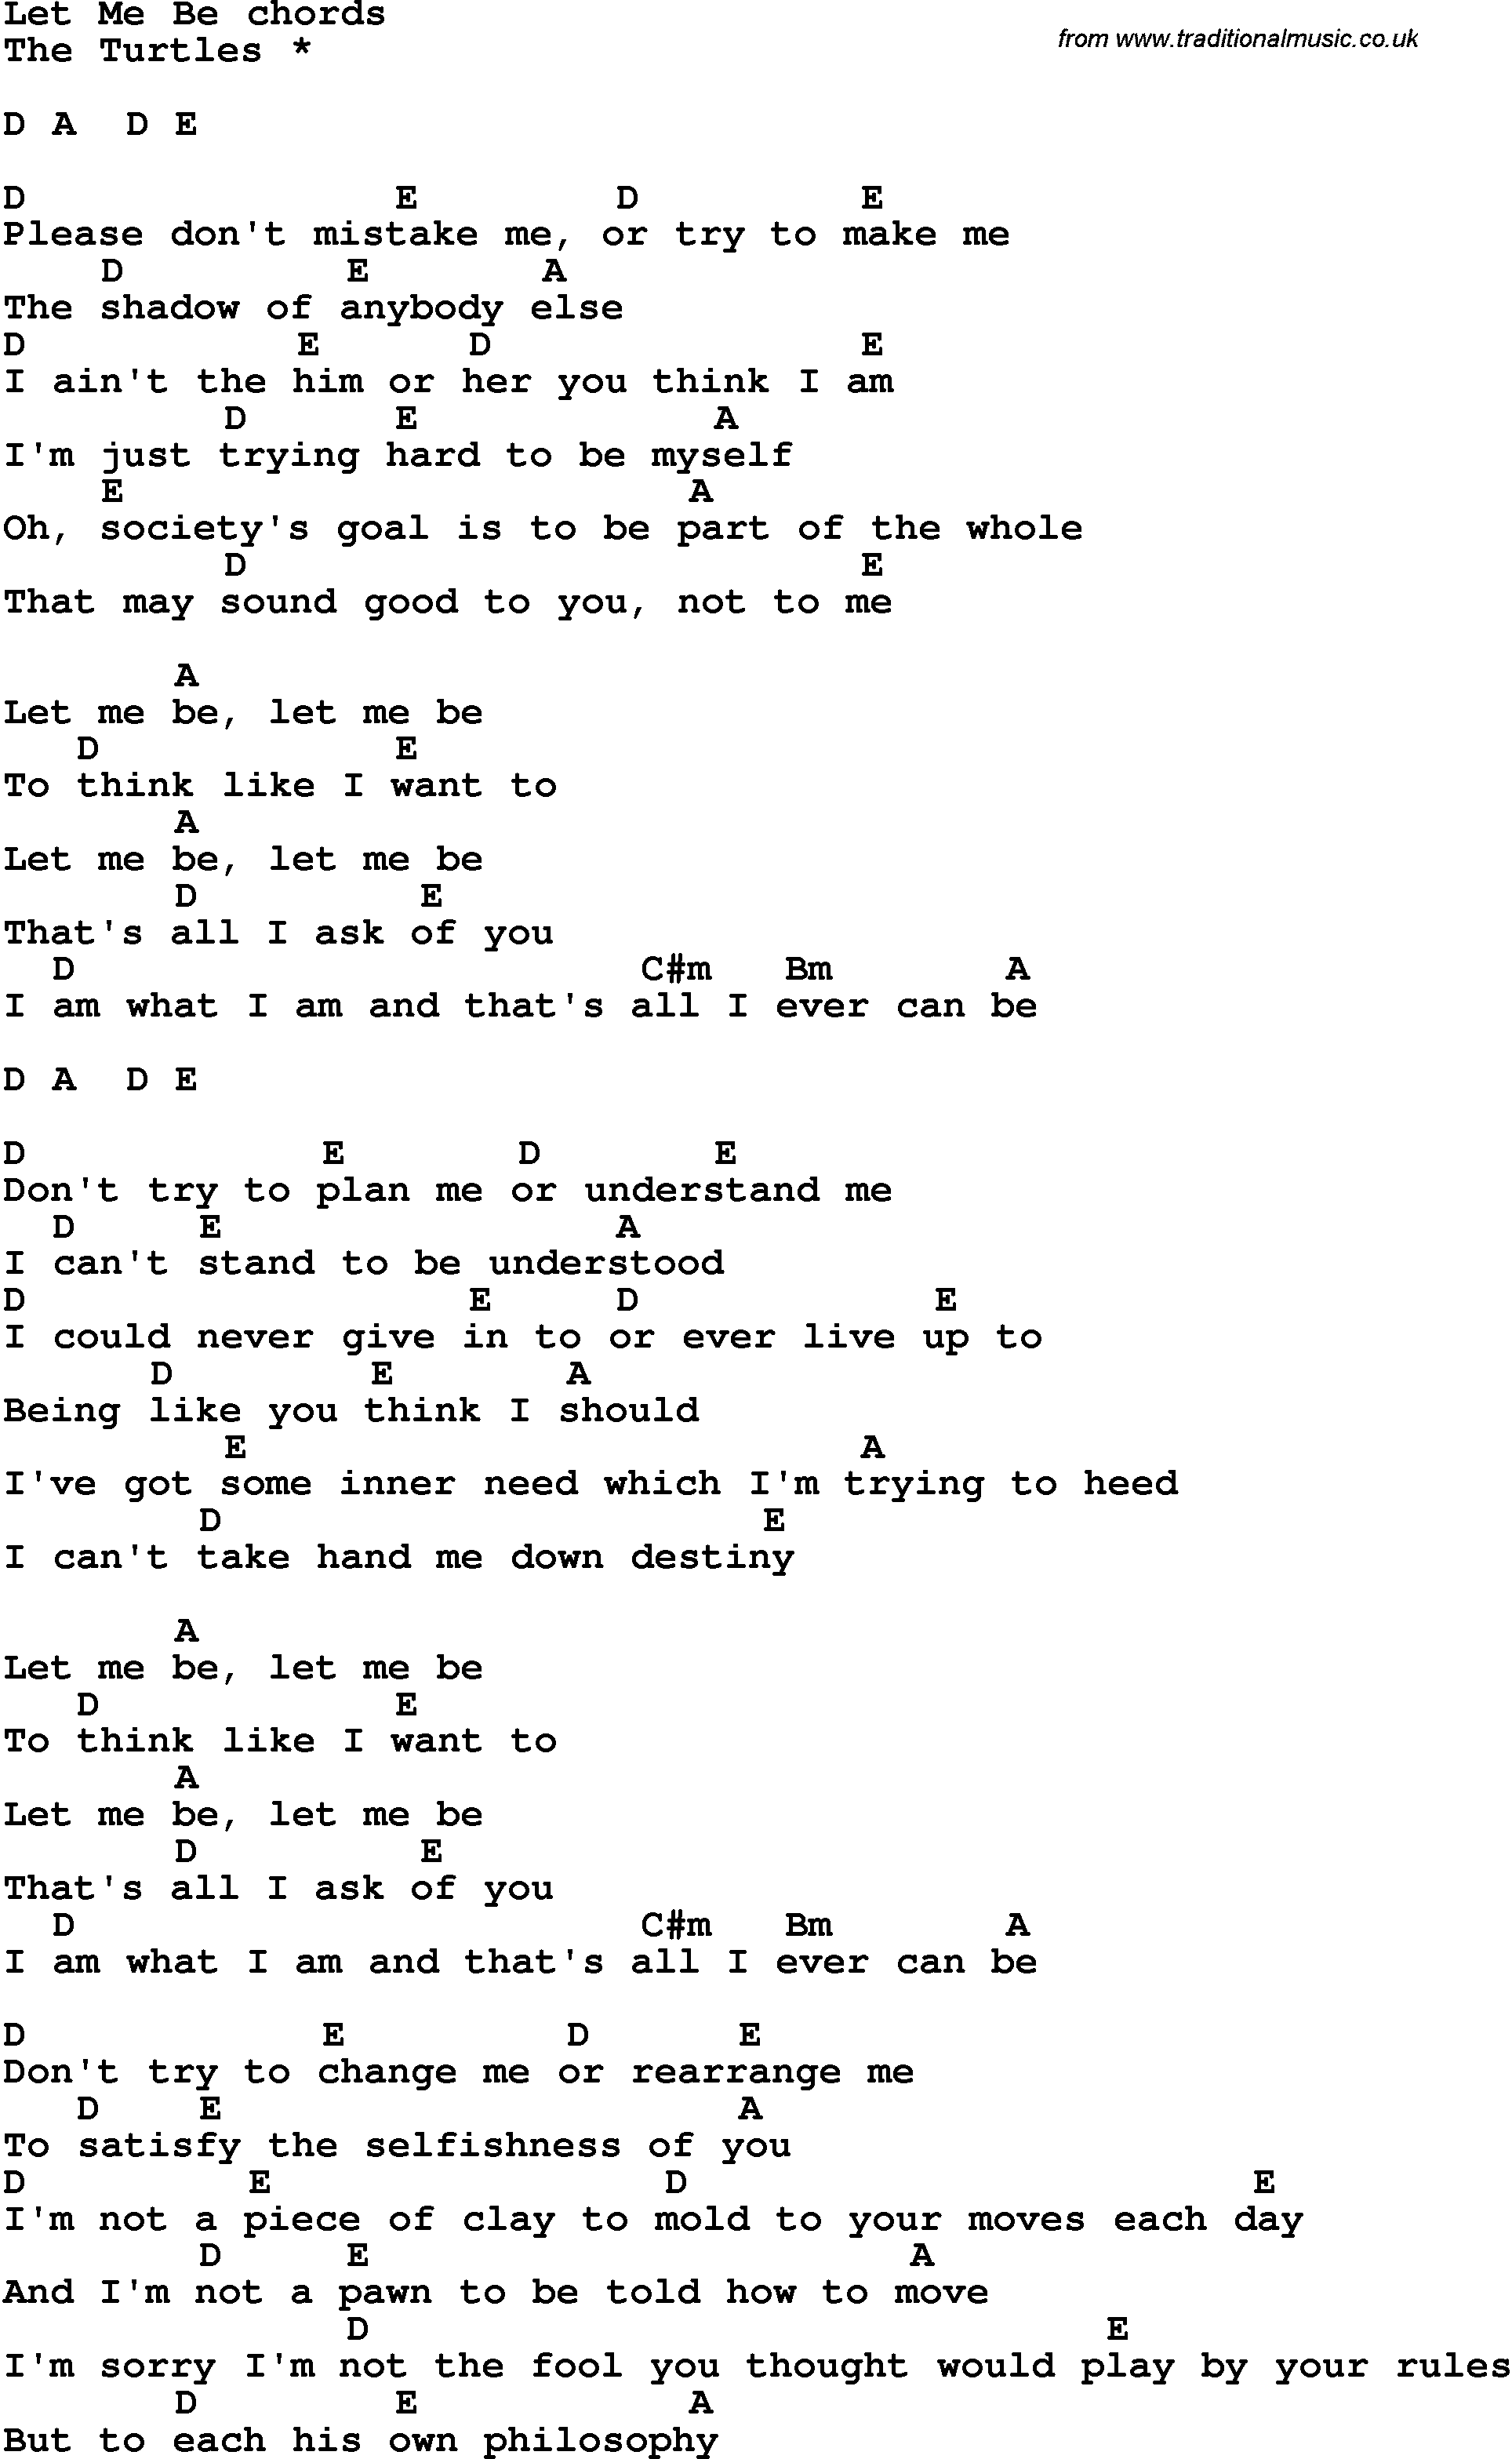 Song lyrics with guitar chords for Let Me Be